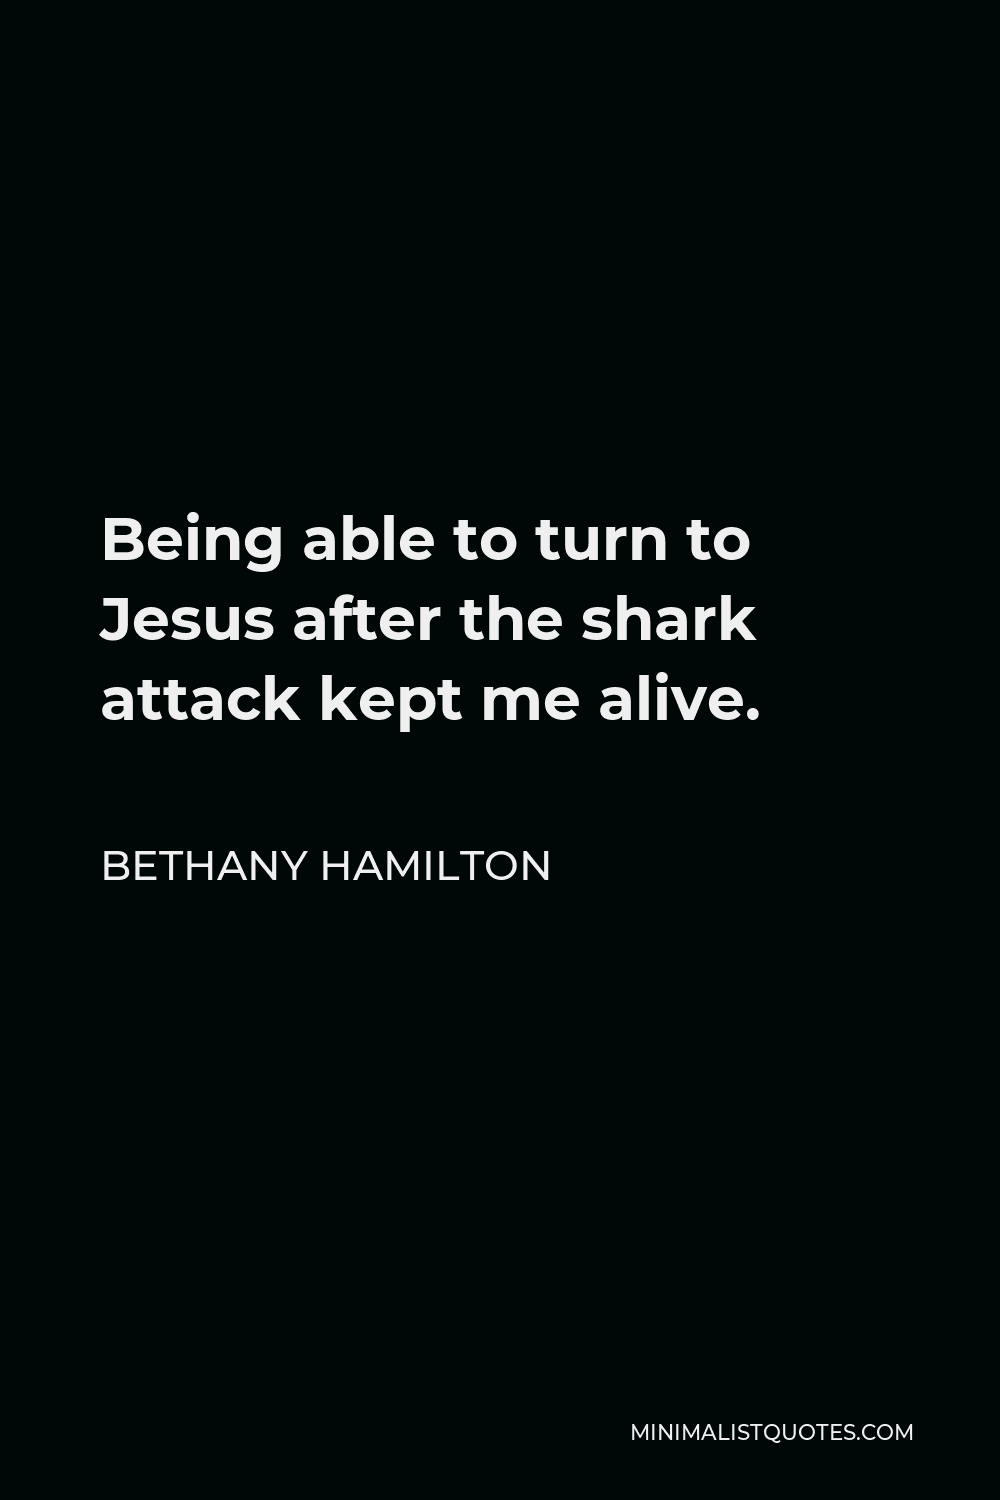 Bethany Hamilton Quote - Being able to turn to Jesus after the shark attack kept me alive.